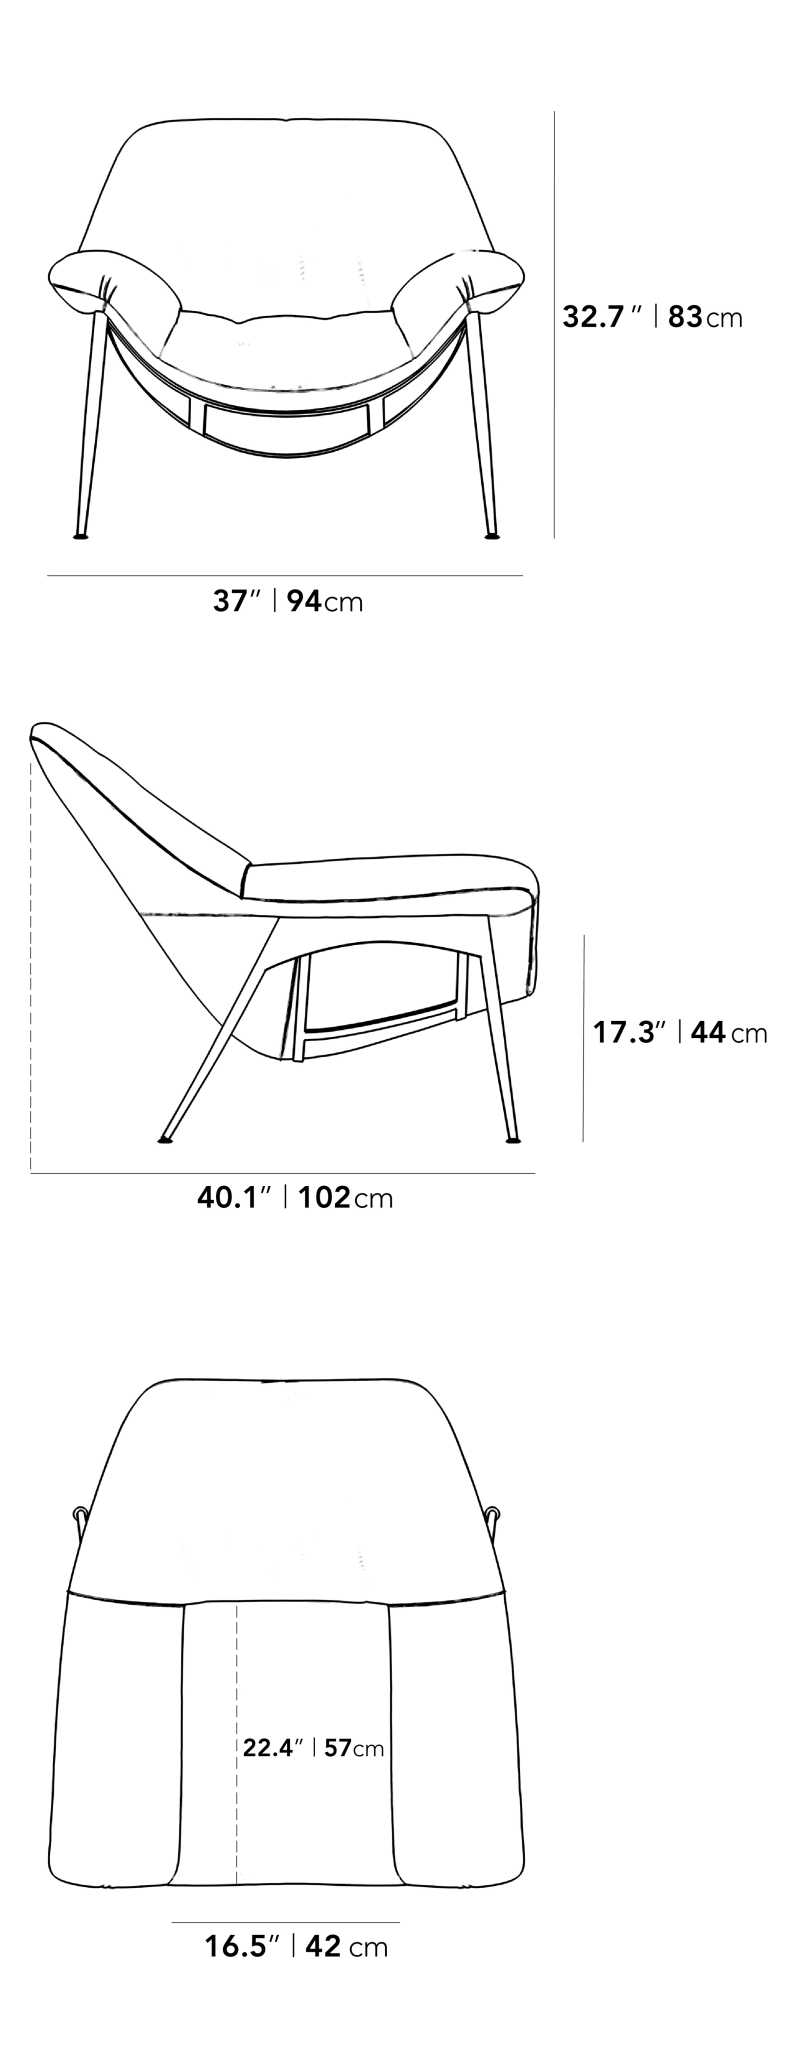 Dimensions for Davos Lounge Chair